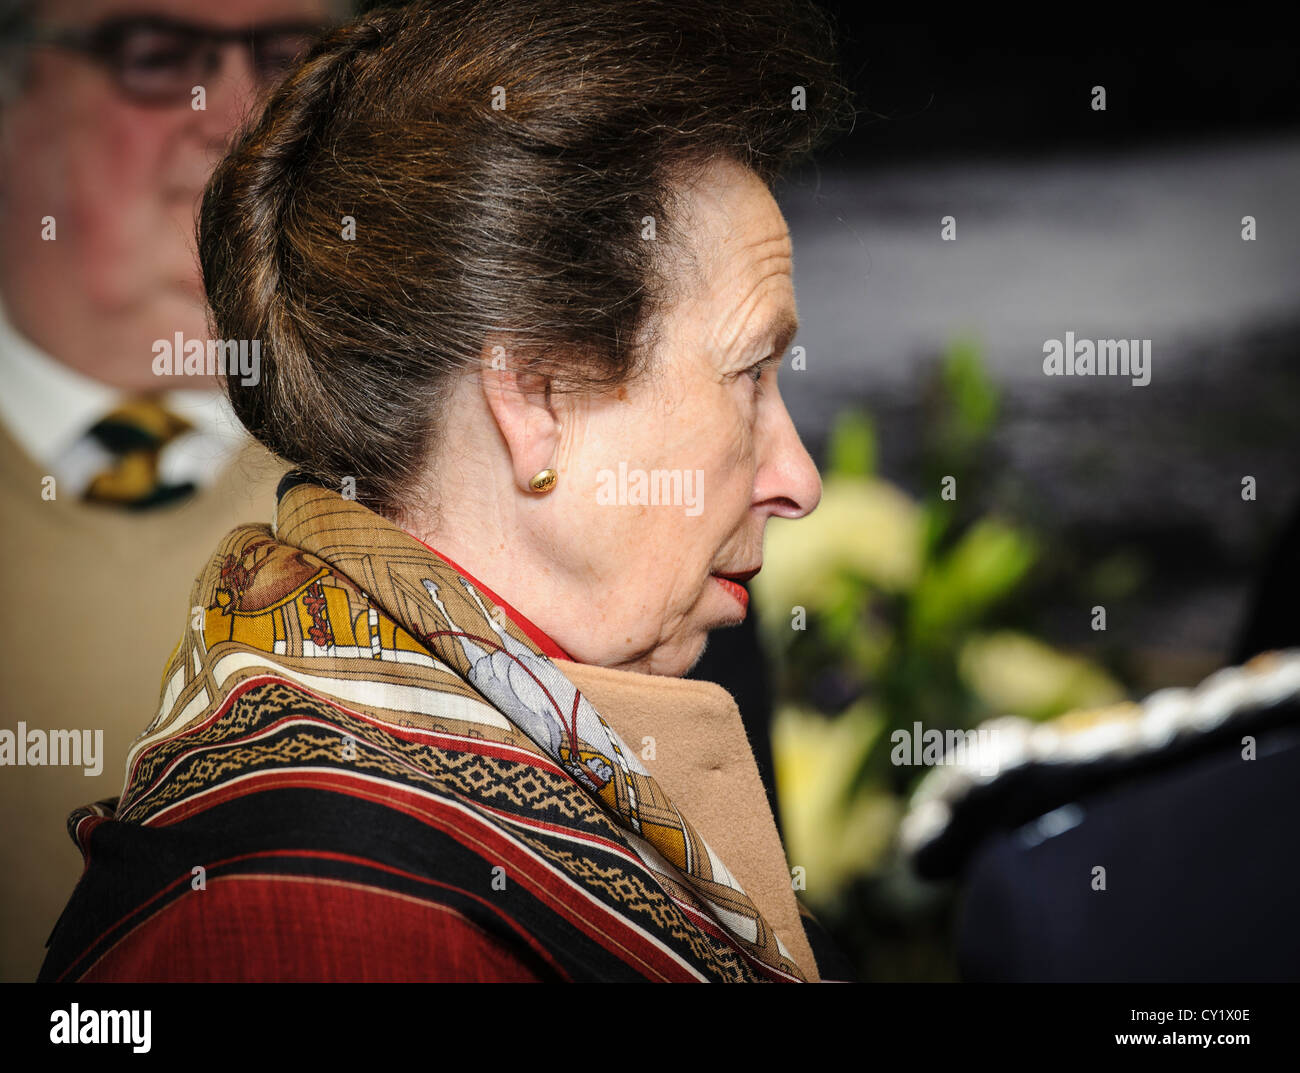 Her Royal Highness, The Princess Royal visits the new State Hospital Carstairs Lanarkshire Stock Photo